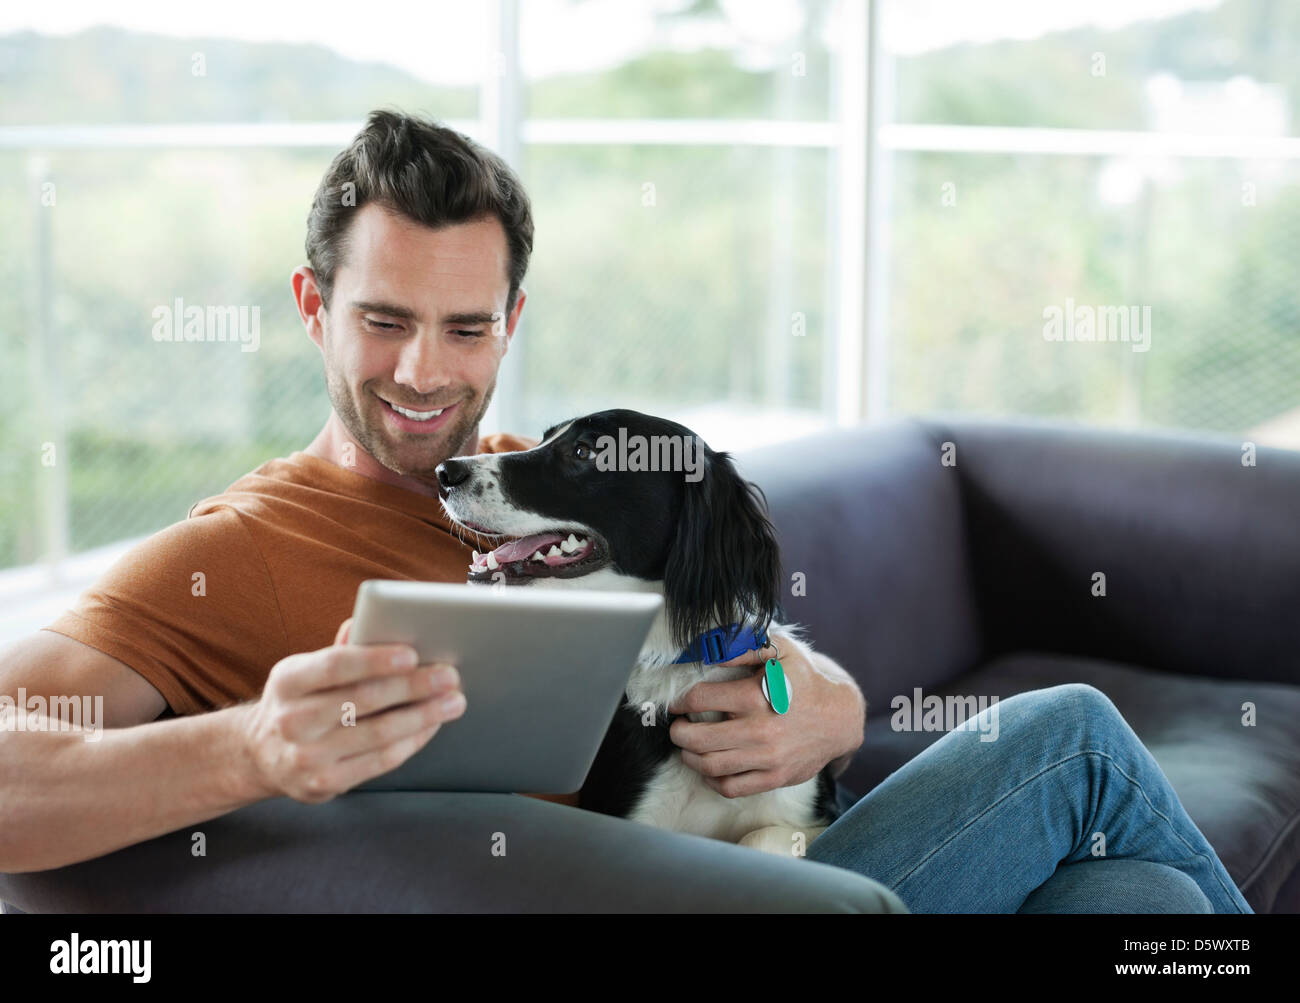 Man petting dog and using tablet computer Stock Photo